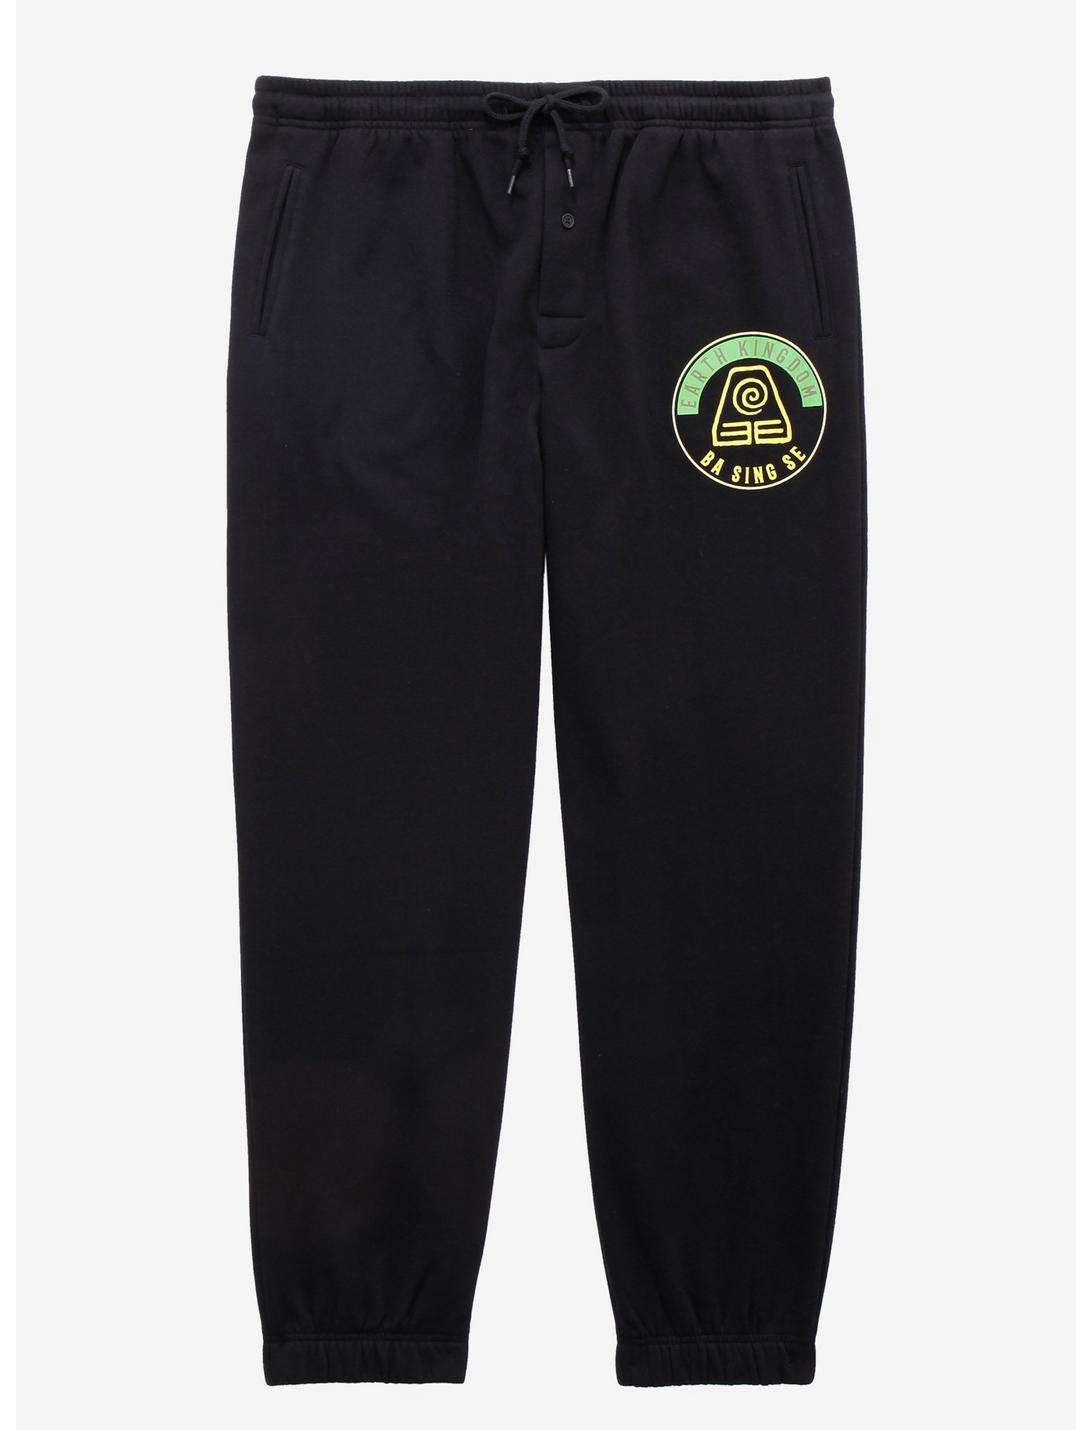 Avatar: The Last Airbender Earth Kingdom Joggers - BoxLunch Exclusive, BLACK, hi-res